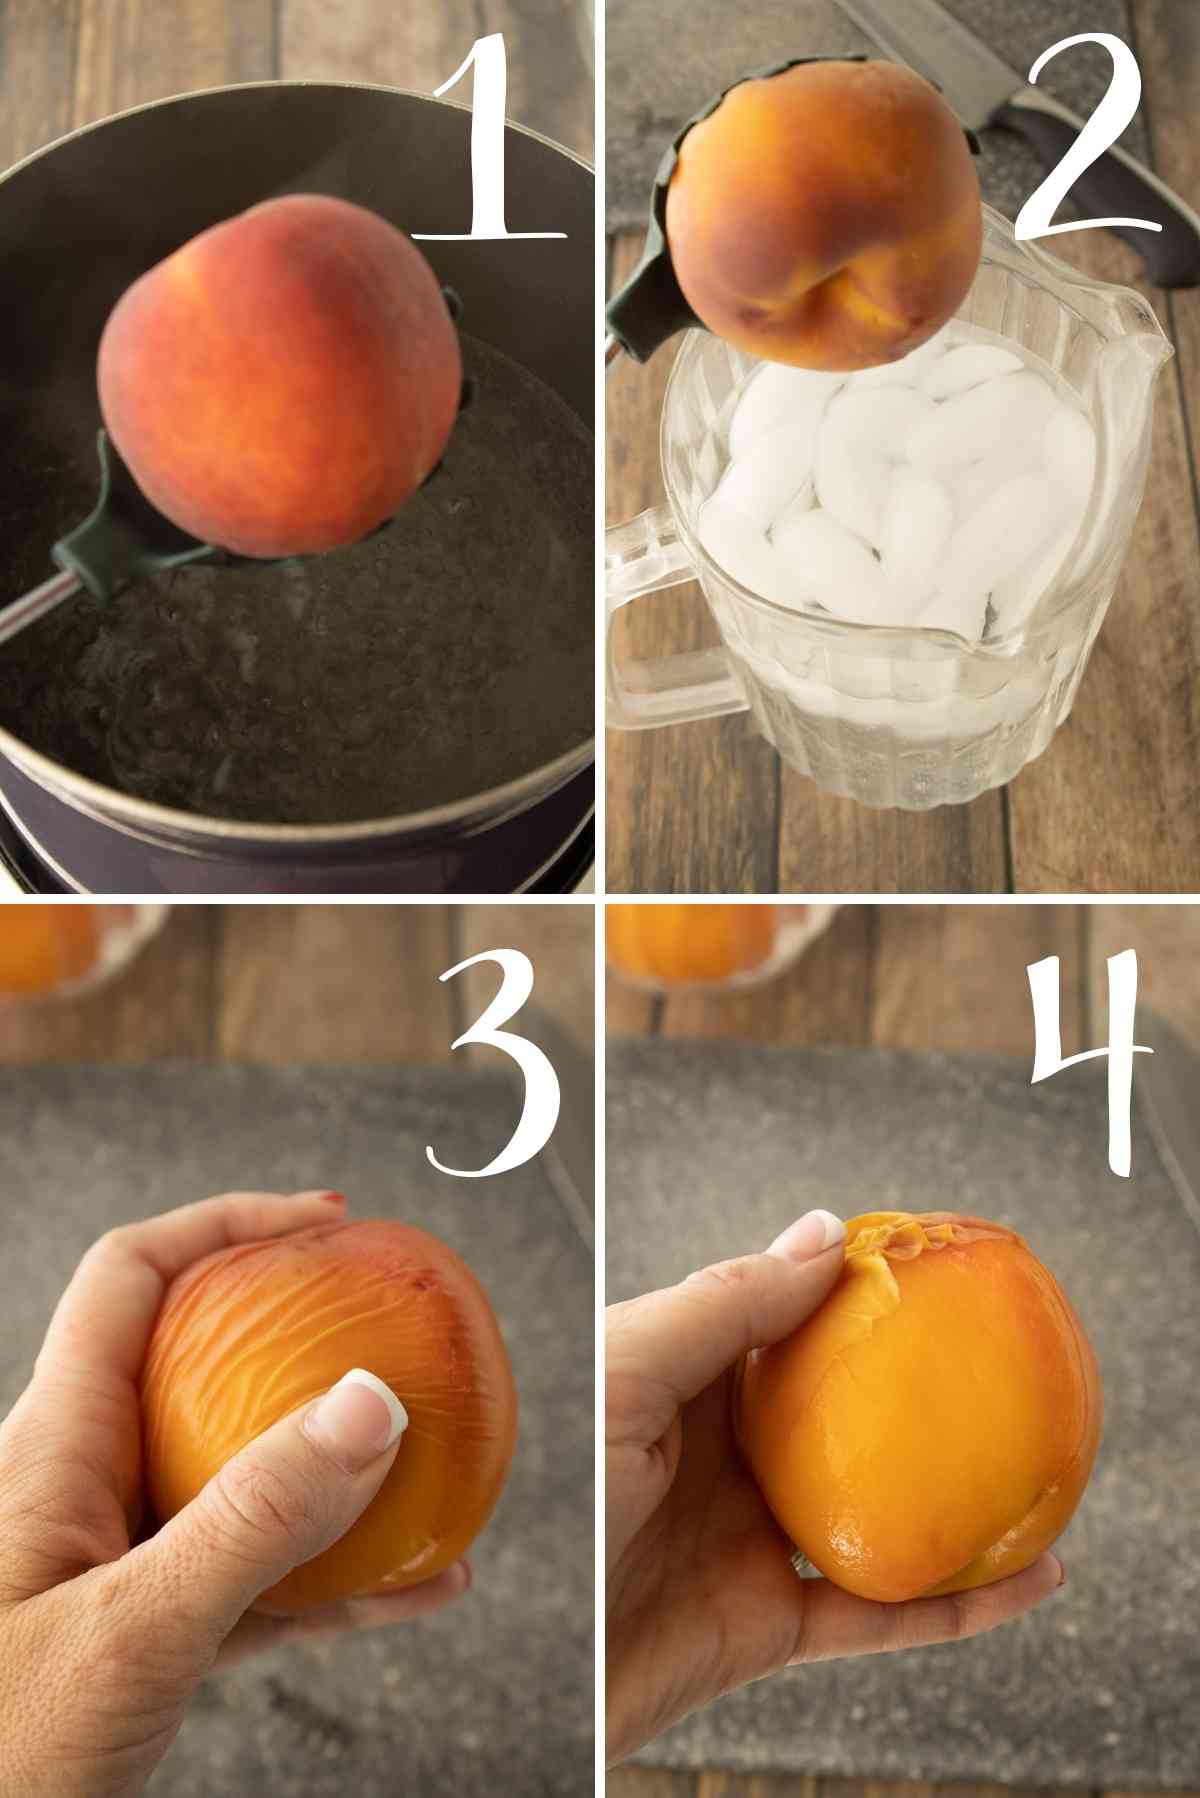 How to easily remove skins off fresh peaches.